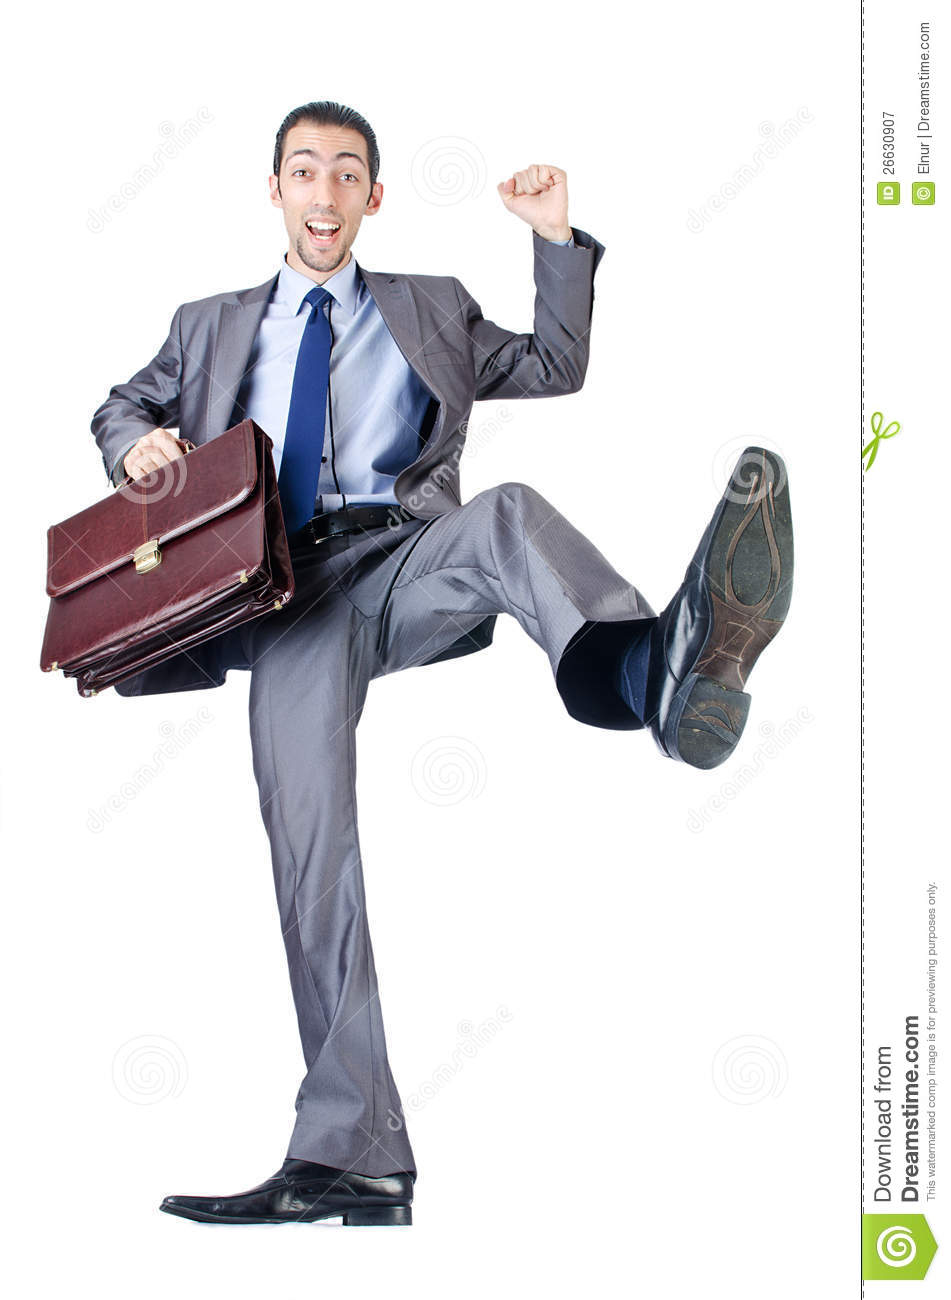 Man With Briefcase Royalty Free Stock Photography   Image  26630907